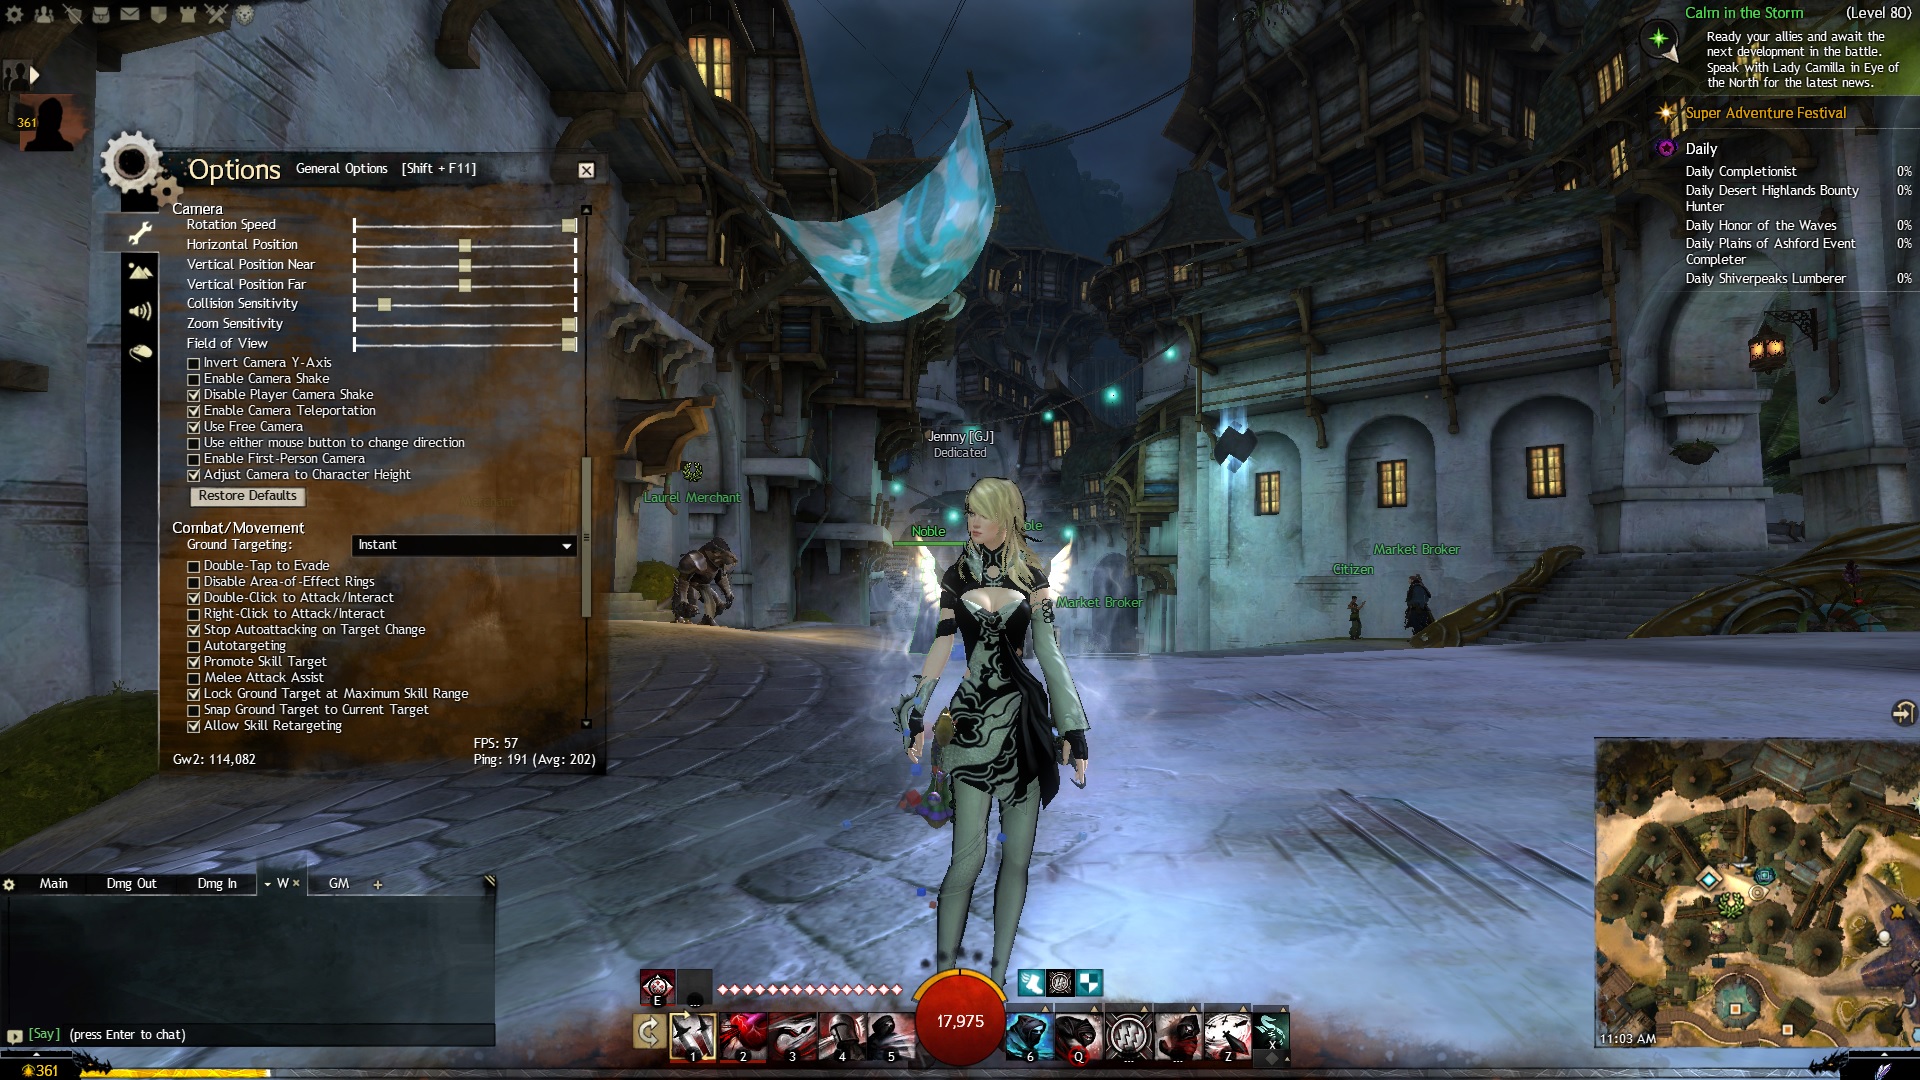 guild wars 2 free to play model